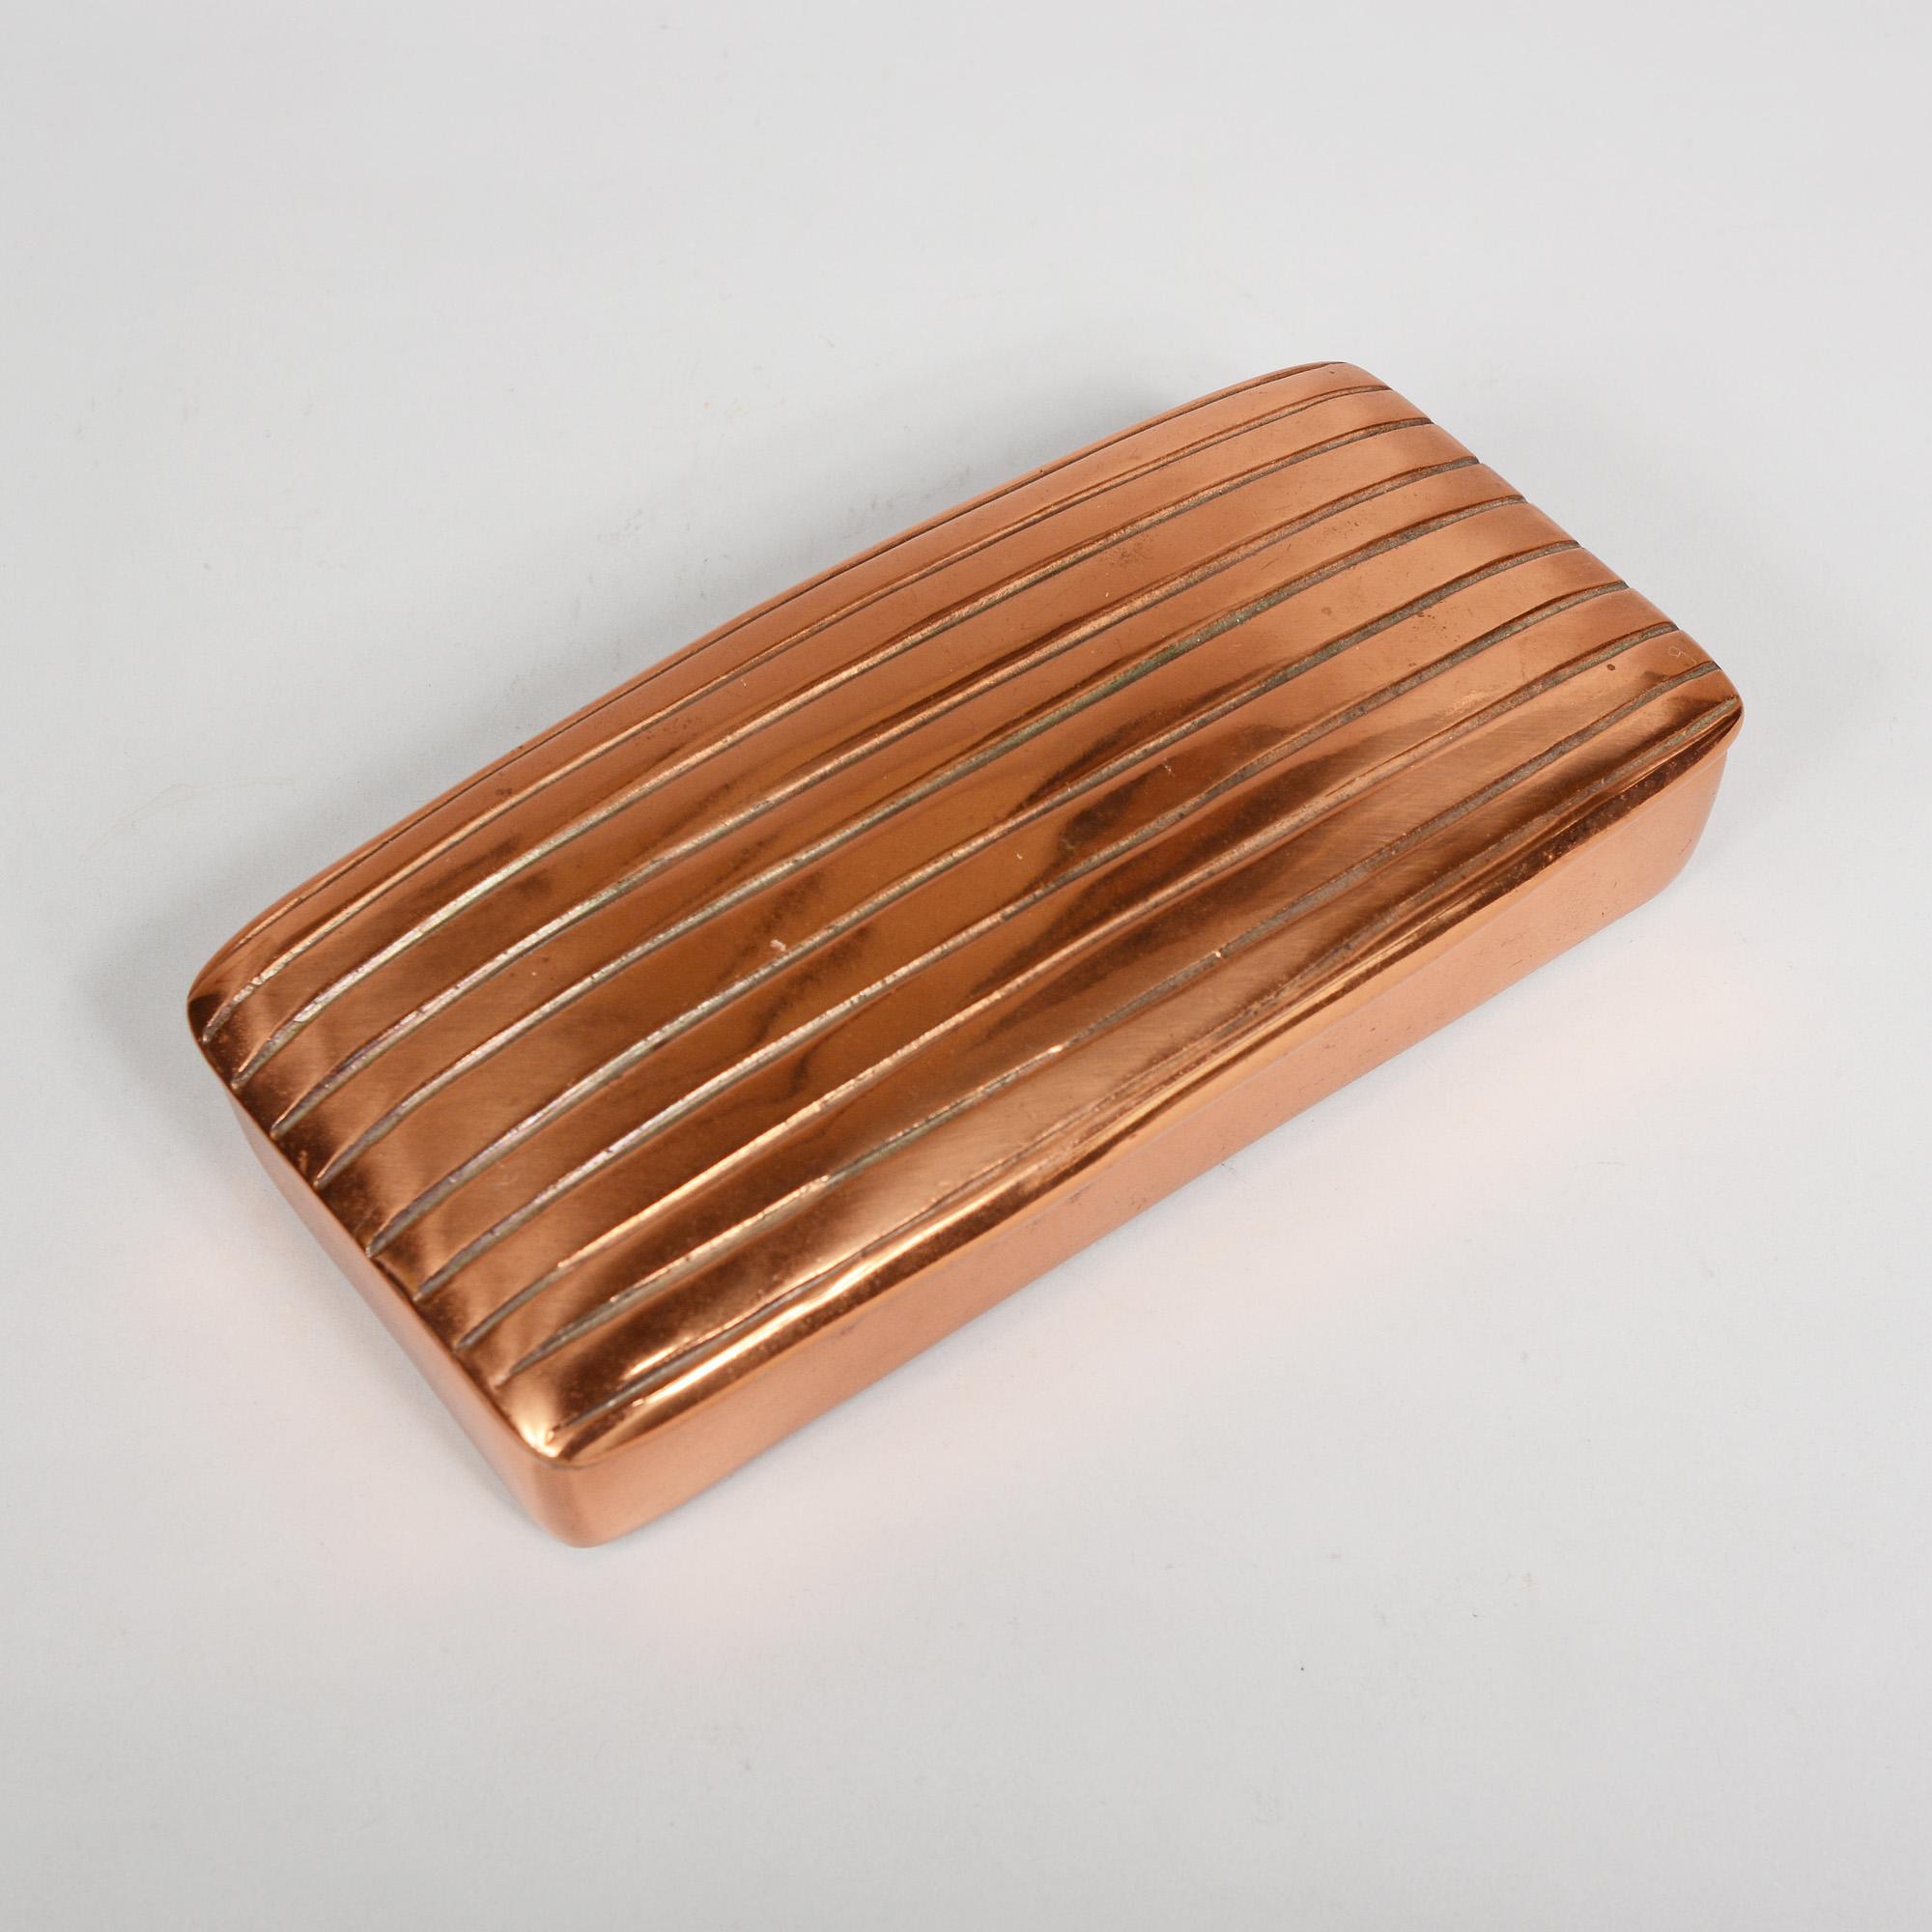 Stash or trinket box with a copper finish designed by Ben Seibel. This box was part of the Jenfred-ware line for Raymor.